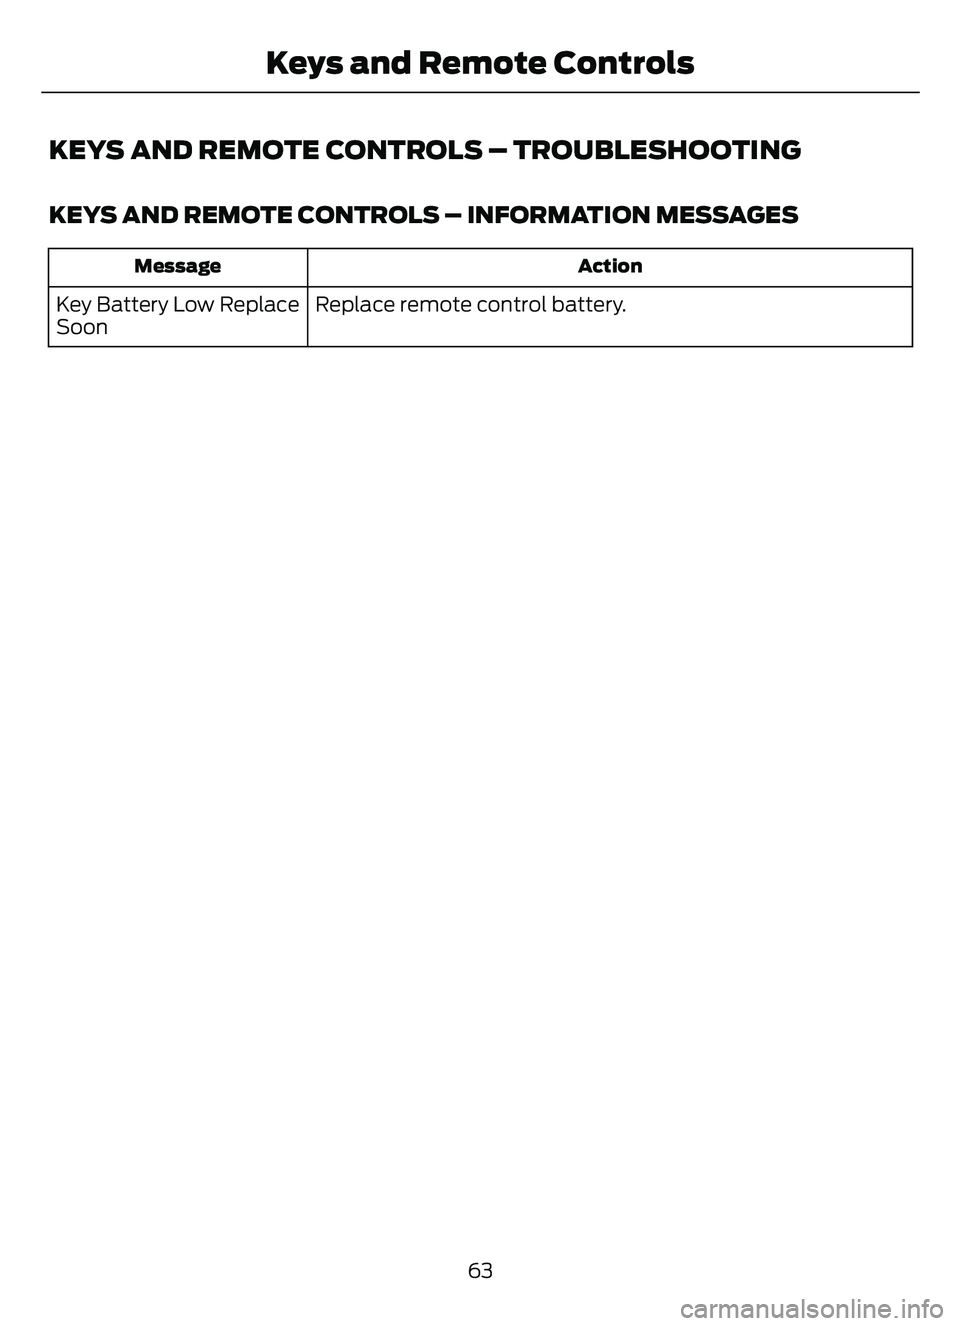 FORD ESCAPE 2022  Owners Manual KEYS AND REMOTE CONTROLS – TROUBLESHOOTING
KEYS AND REMOTE CONTROLS – INFORMATION MESSAGES
Action
Message
Replace remote control battery.
Key Battery Low Replace
Soon
63
Keys and Remote Controls 